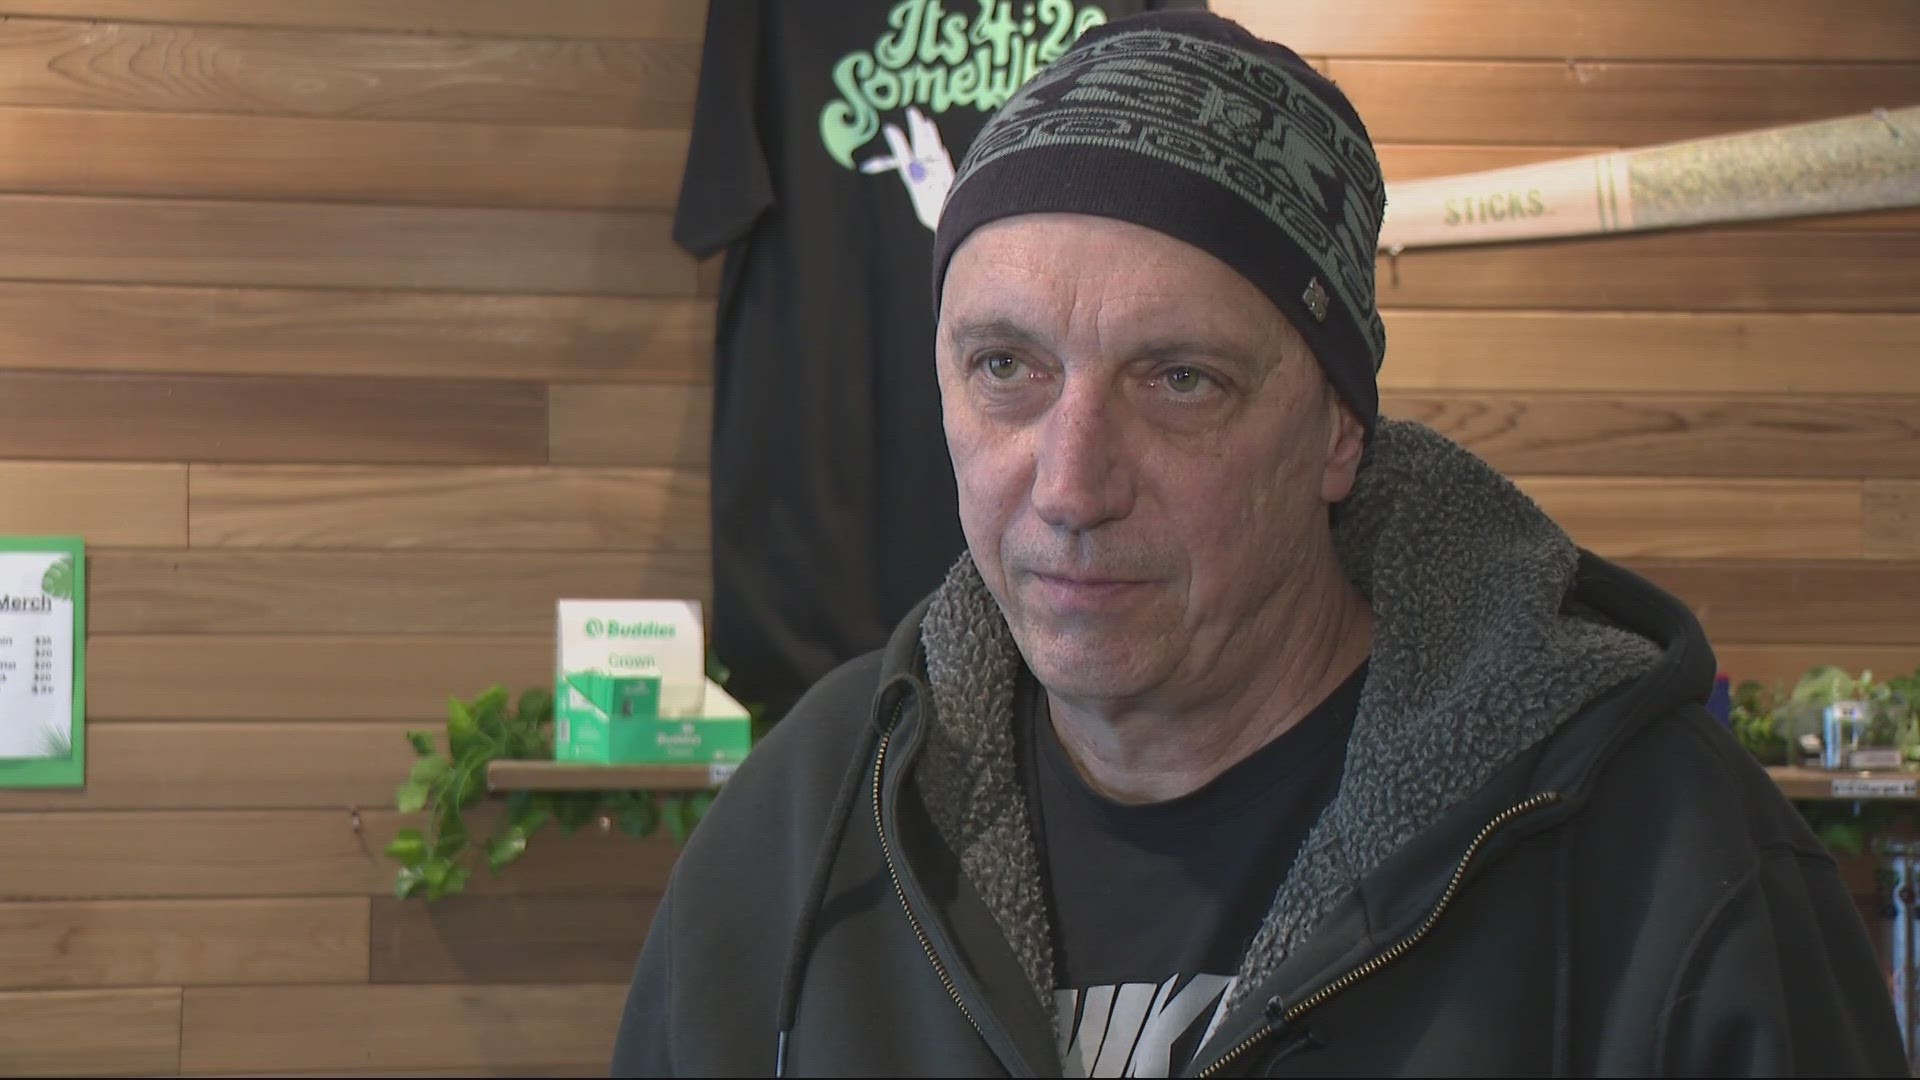 Eden Cannabis's owner told KGW that they have been robbed dozens of times and believe it could be the same person.